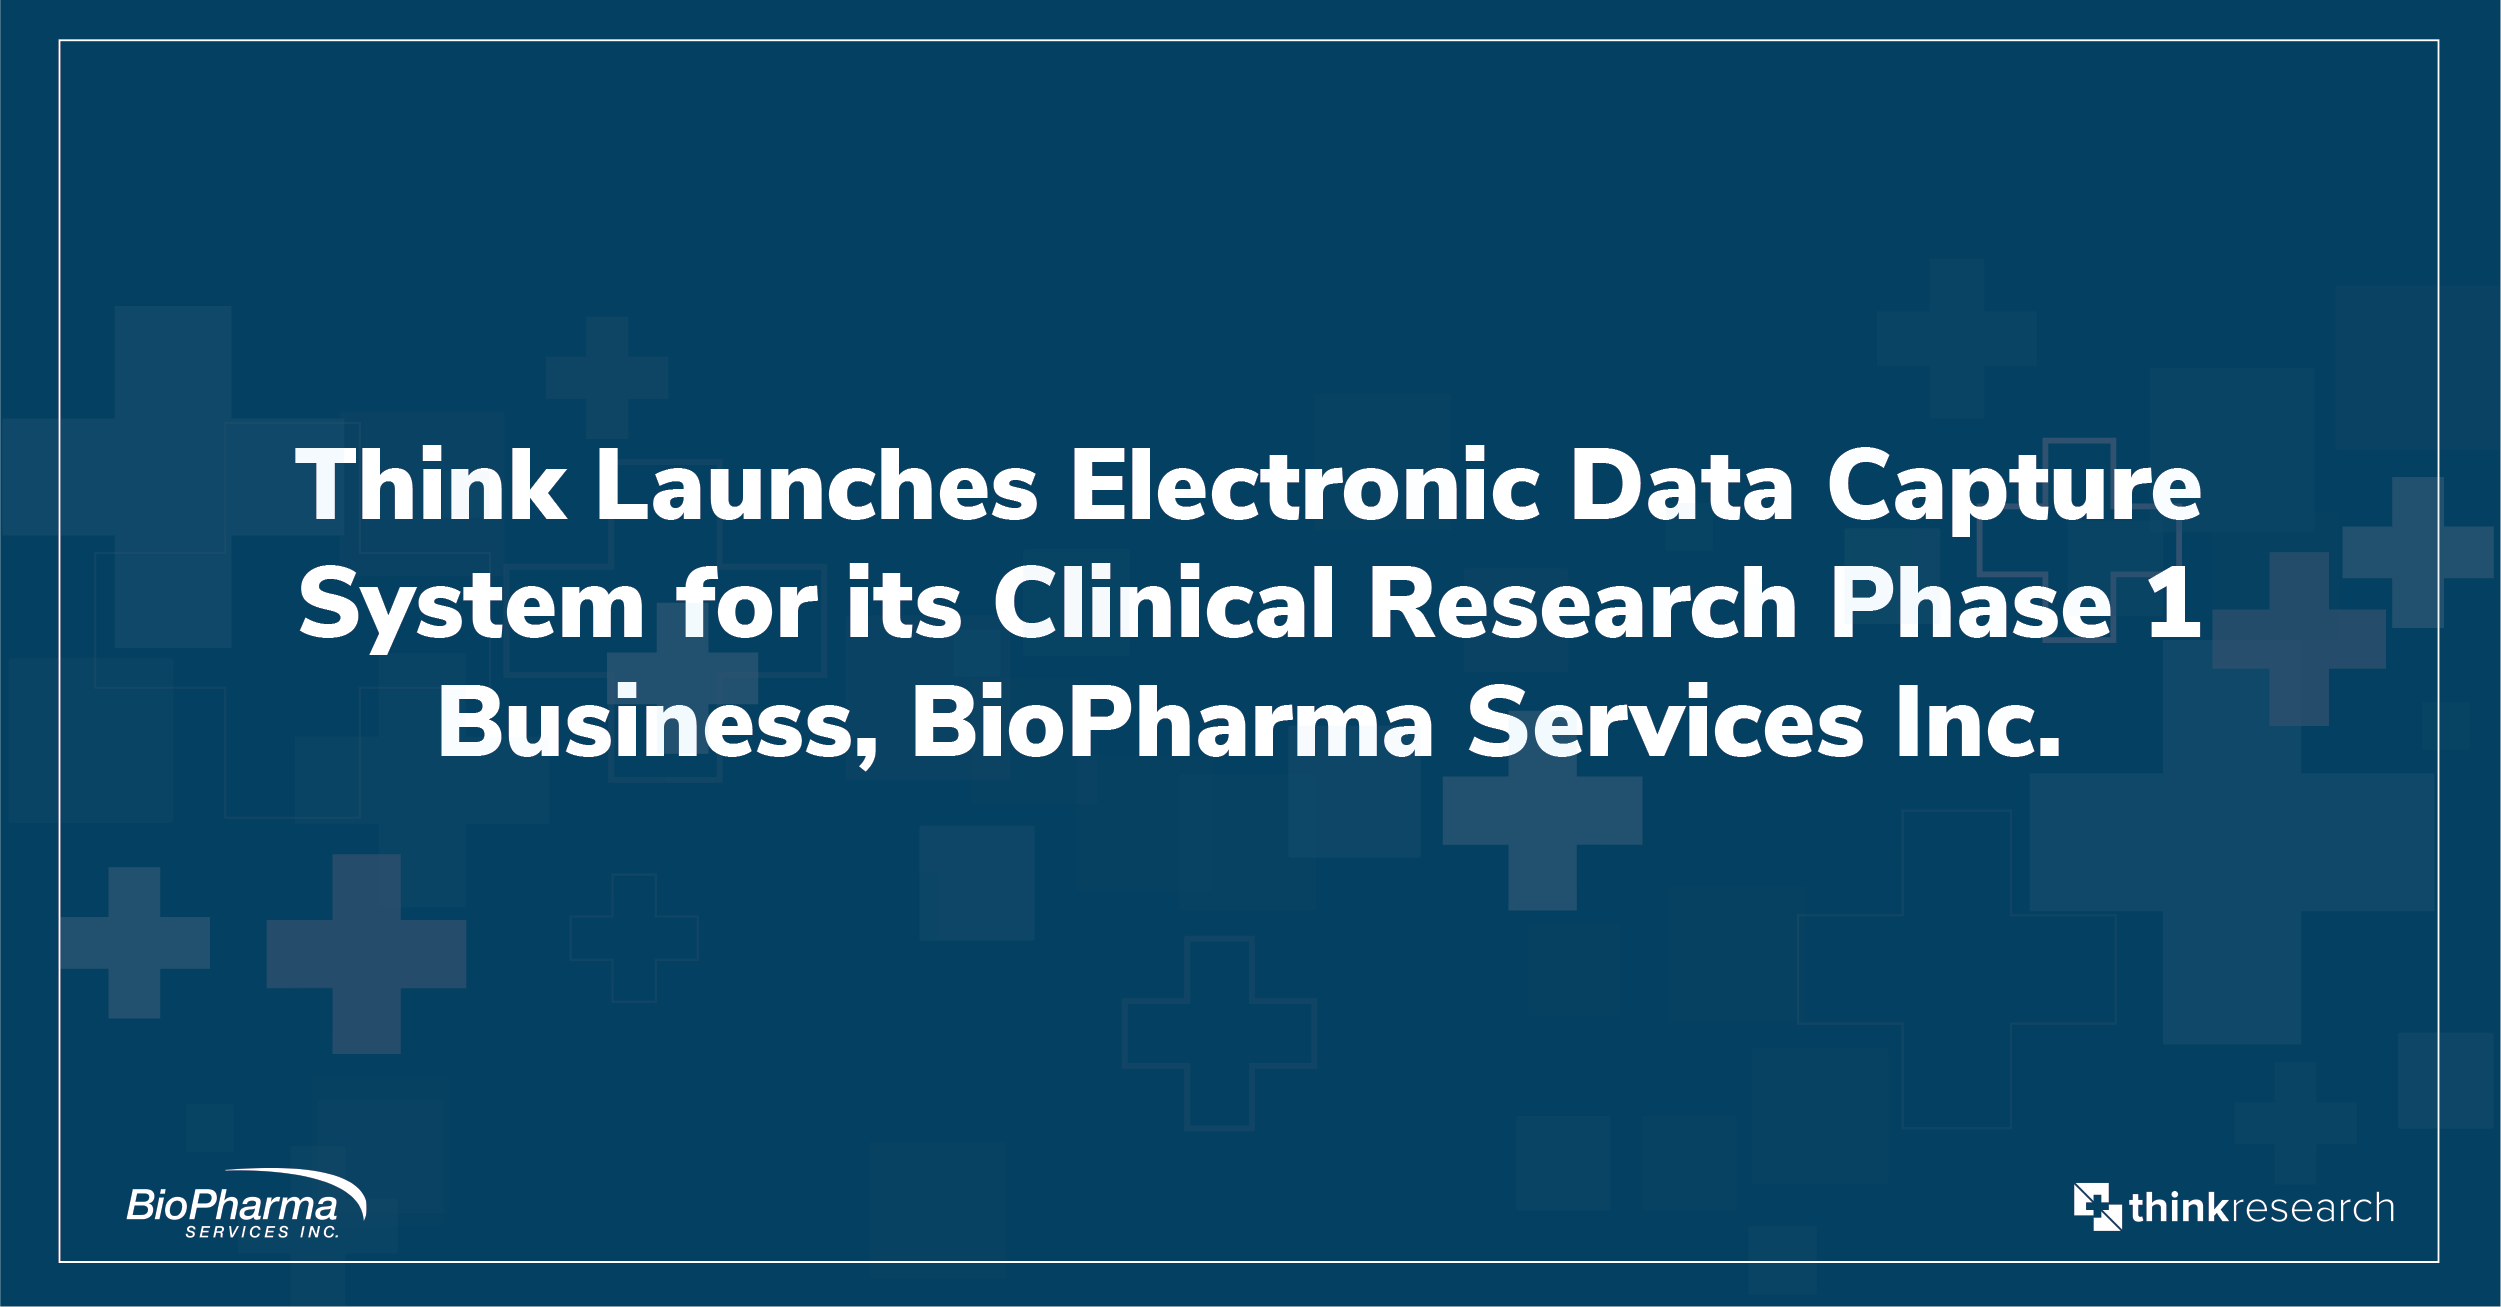 Think Research Launches Electronic Data Capture System for its Clinical Research Phase 1 Business, BioPharma Services Inc.